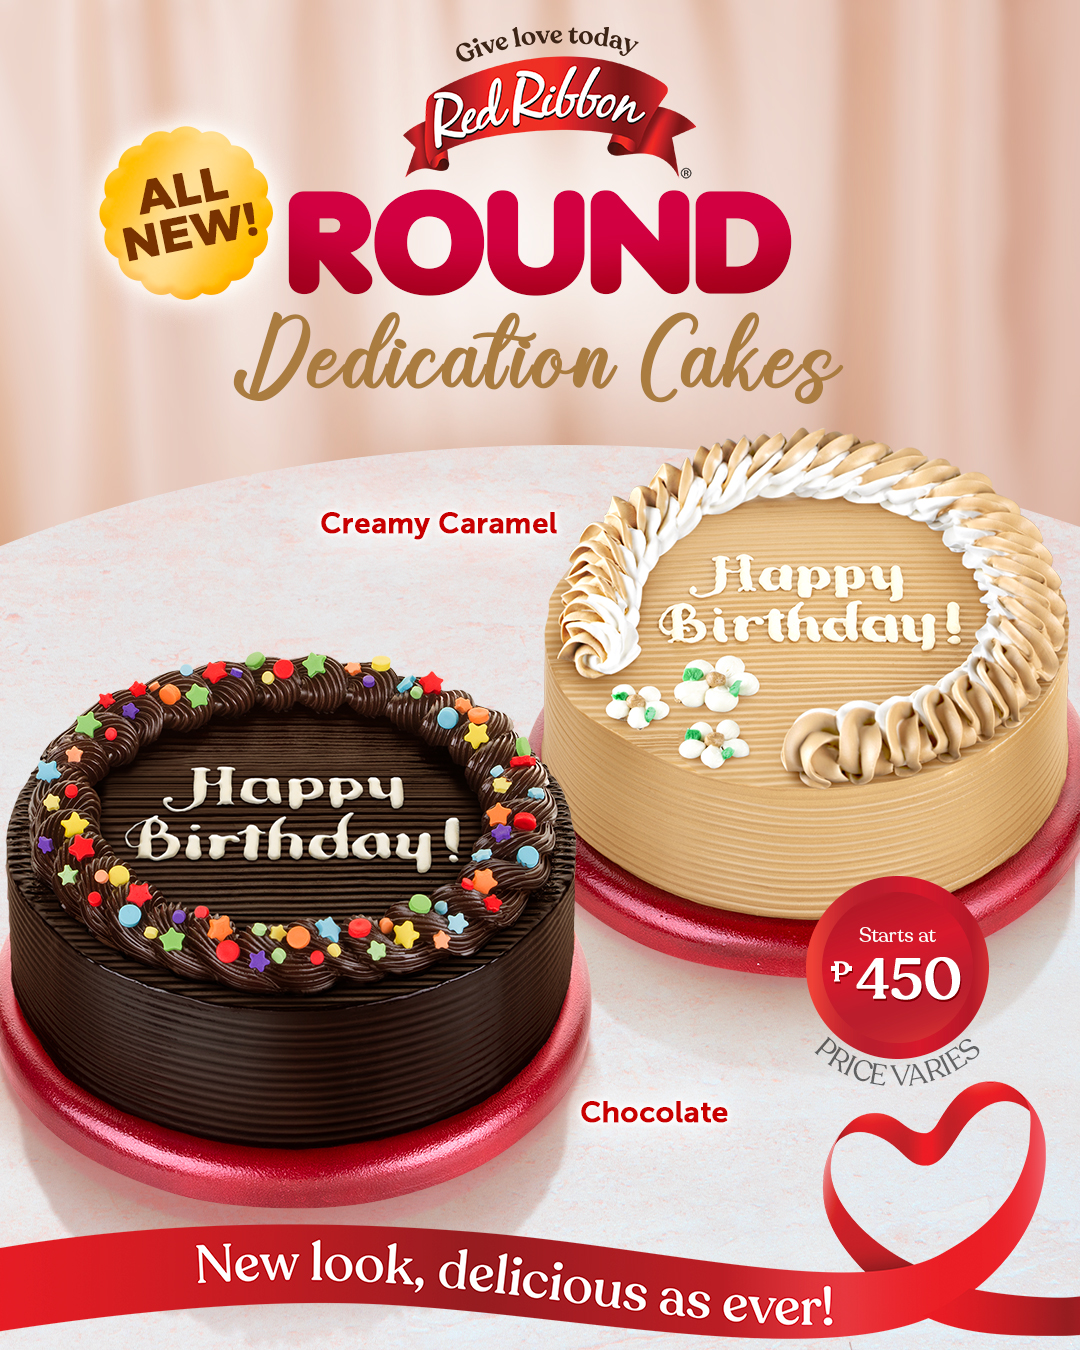 Make your celebrations special all year round with Red Ribbon’s Round Dedication Cakes